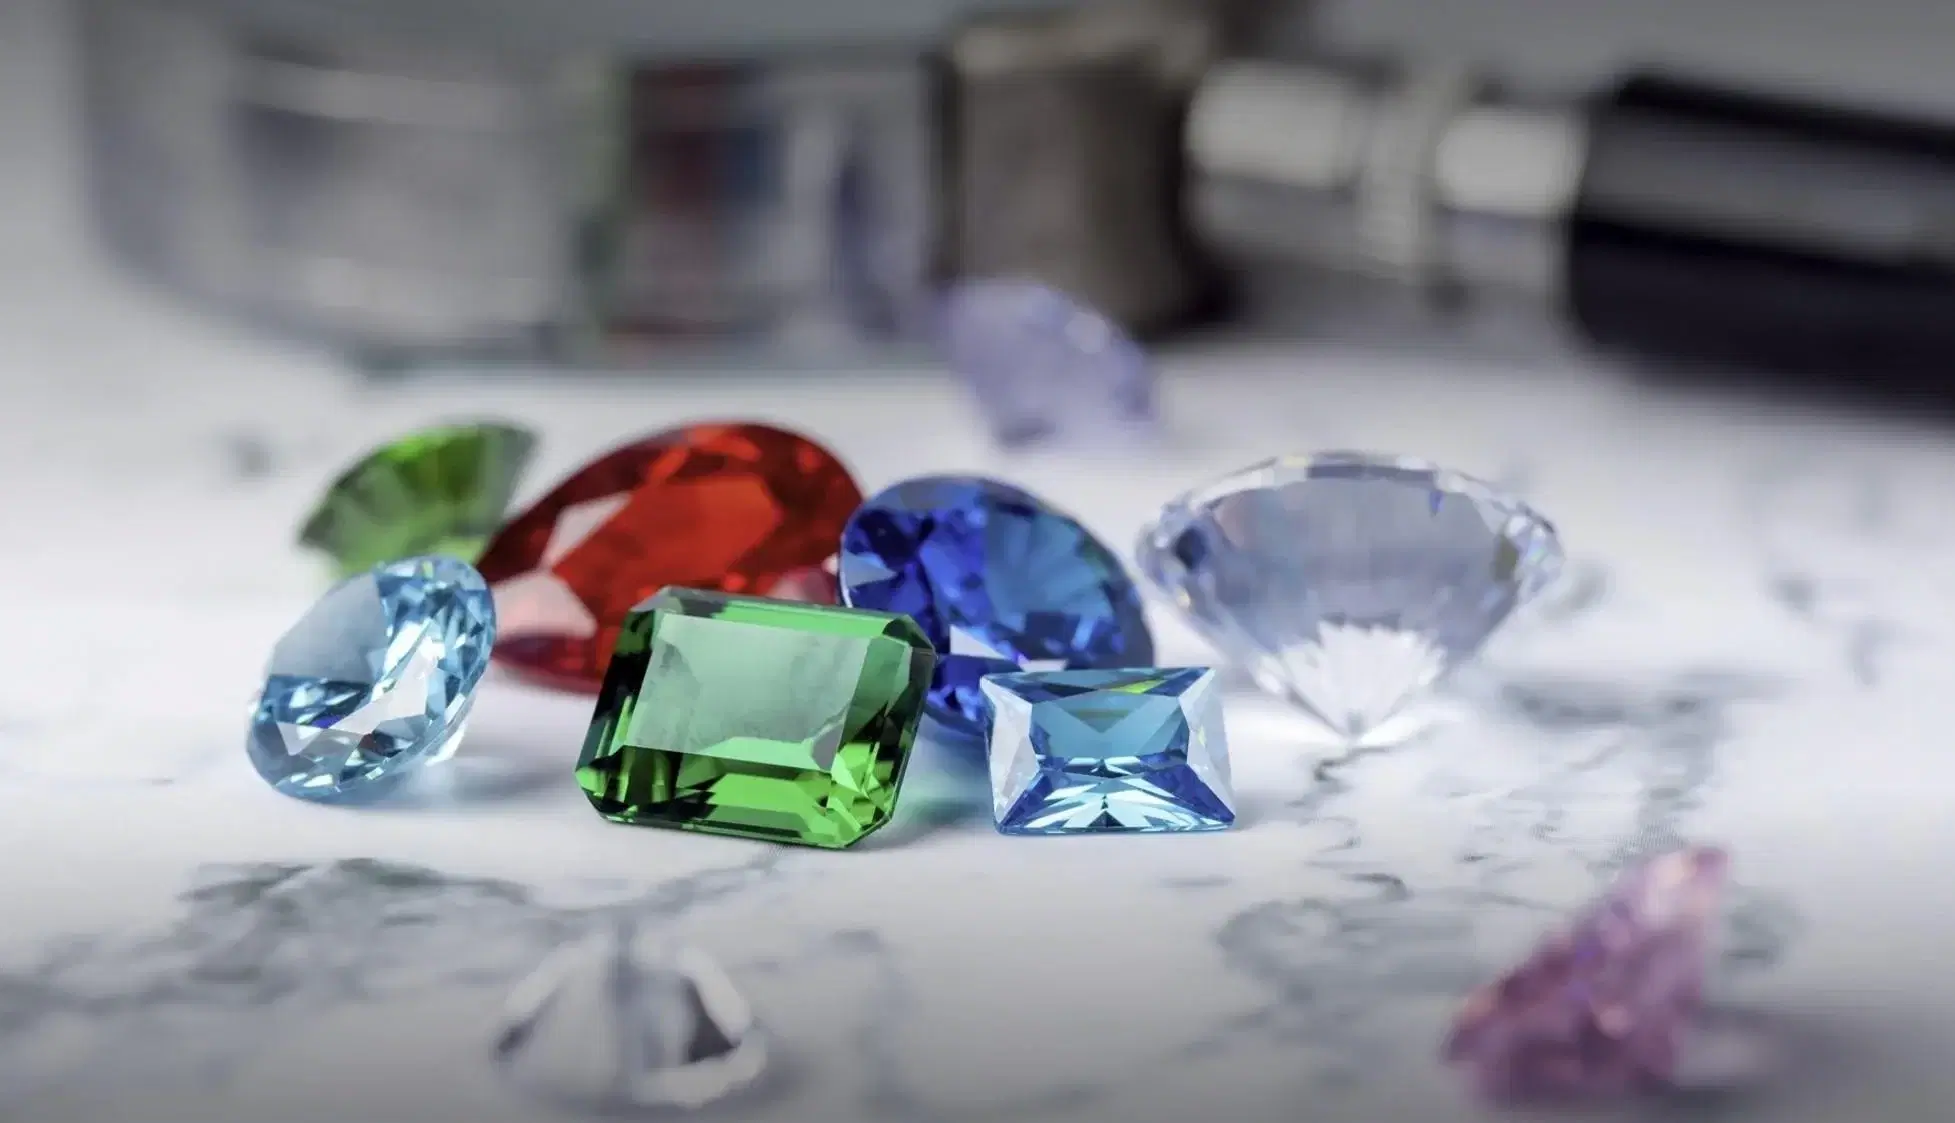 List of 24 Gemstones with Names, Colors, & Pictures